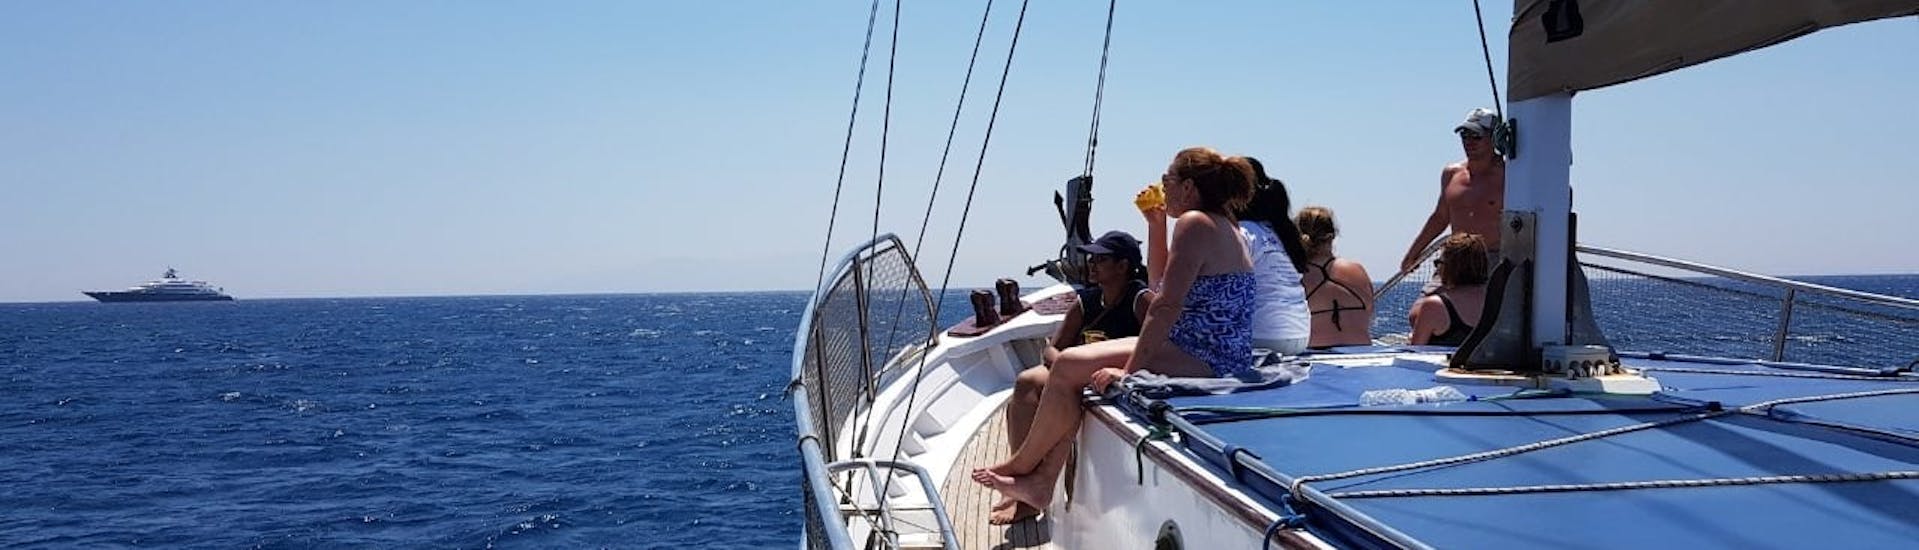 People on our traditional wooden woat during the Boat Trip to Delos & Rhenia from Mykonos with Mykonos Cruises.